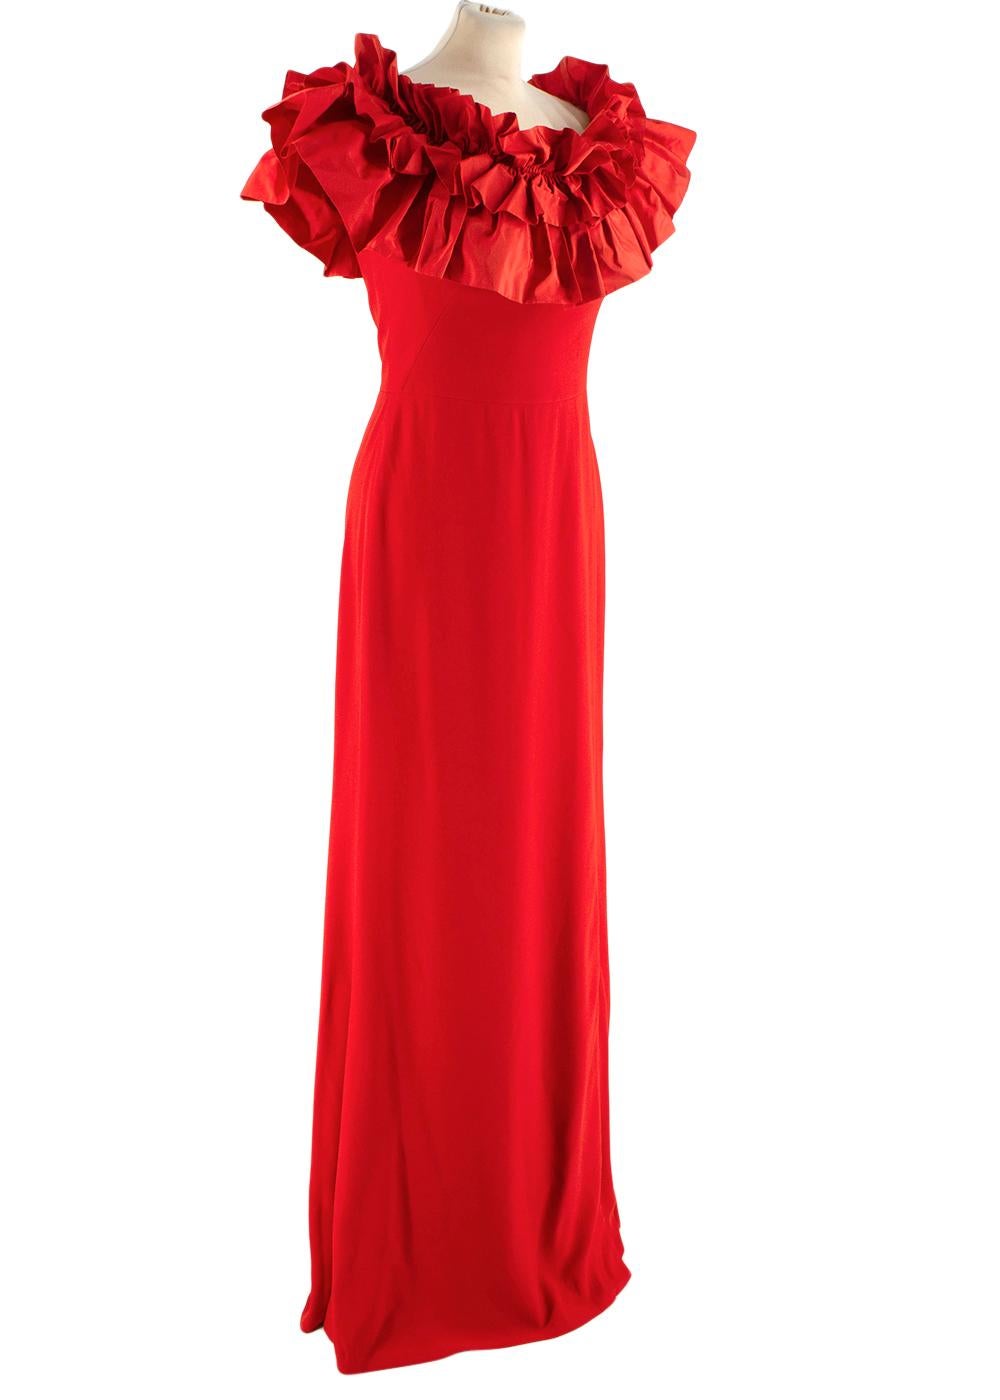 Alexander McQueen Red Off-Shoulder Ruffle Detail Gown

- Full-length dress
- Off-shoulder neck
- Large silk ruffle trim at the front and rear
- Short sleeves
- Fitted waist 
- Light boning
- Flared skirt
- Slit at front left sl
- Invisible zip at